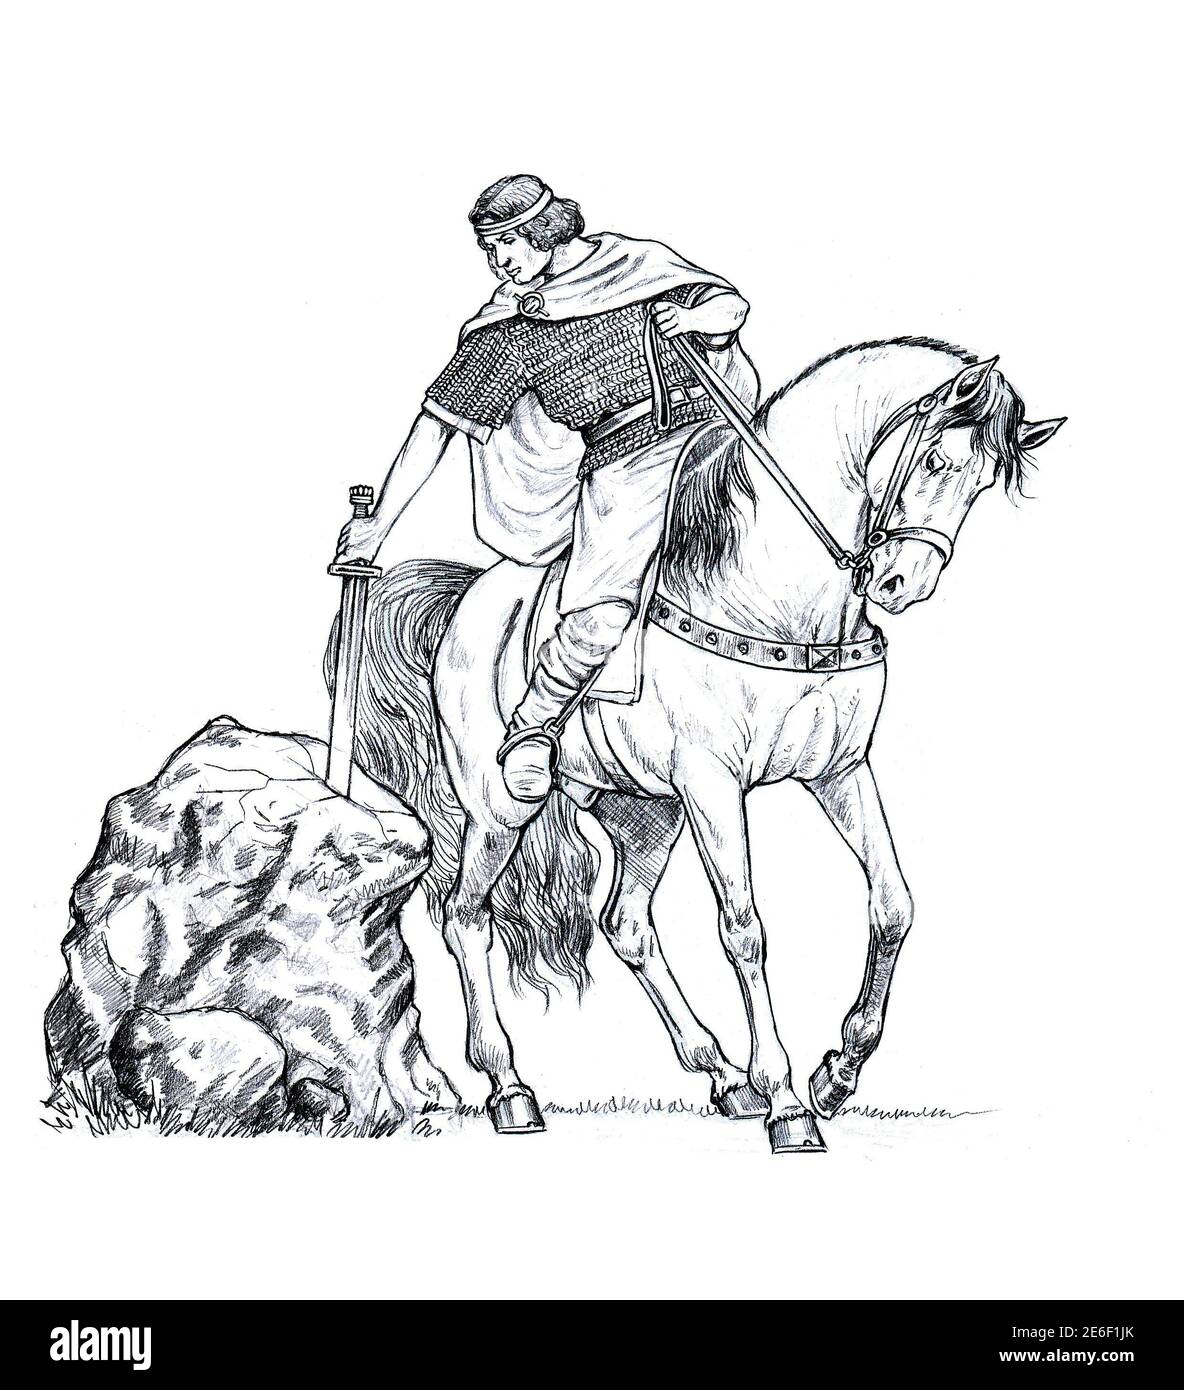 King Arthur with excalibur. Mounted knight of camelot. Pencil drawing. Stock Photo